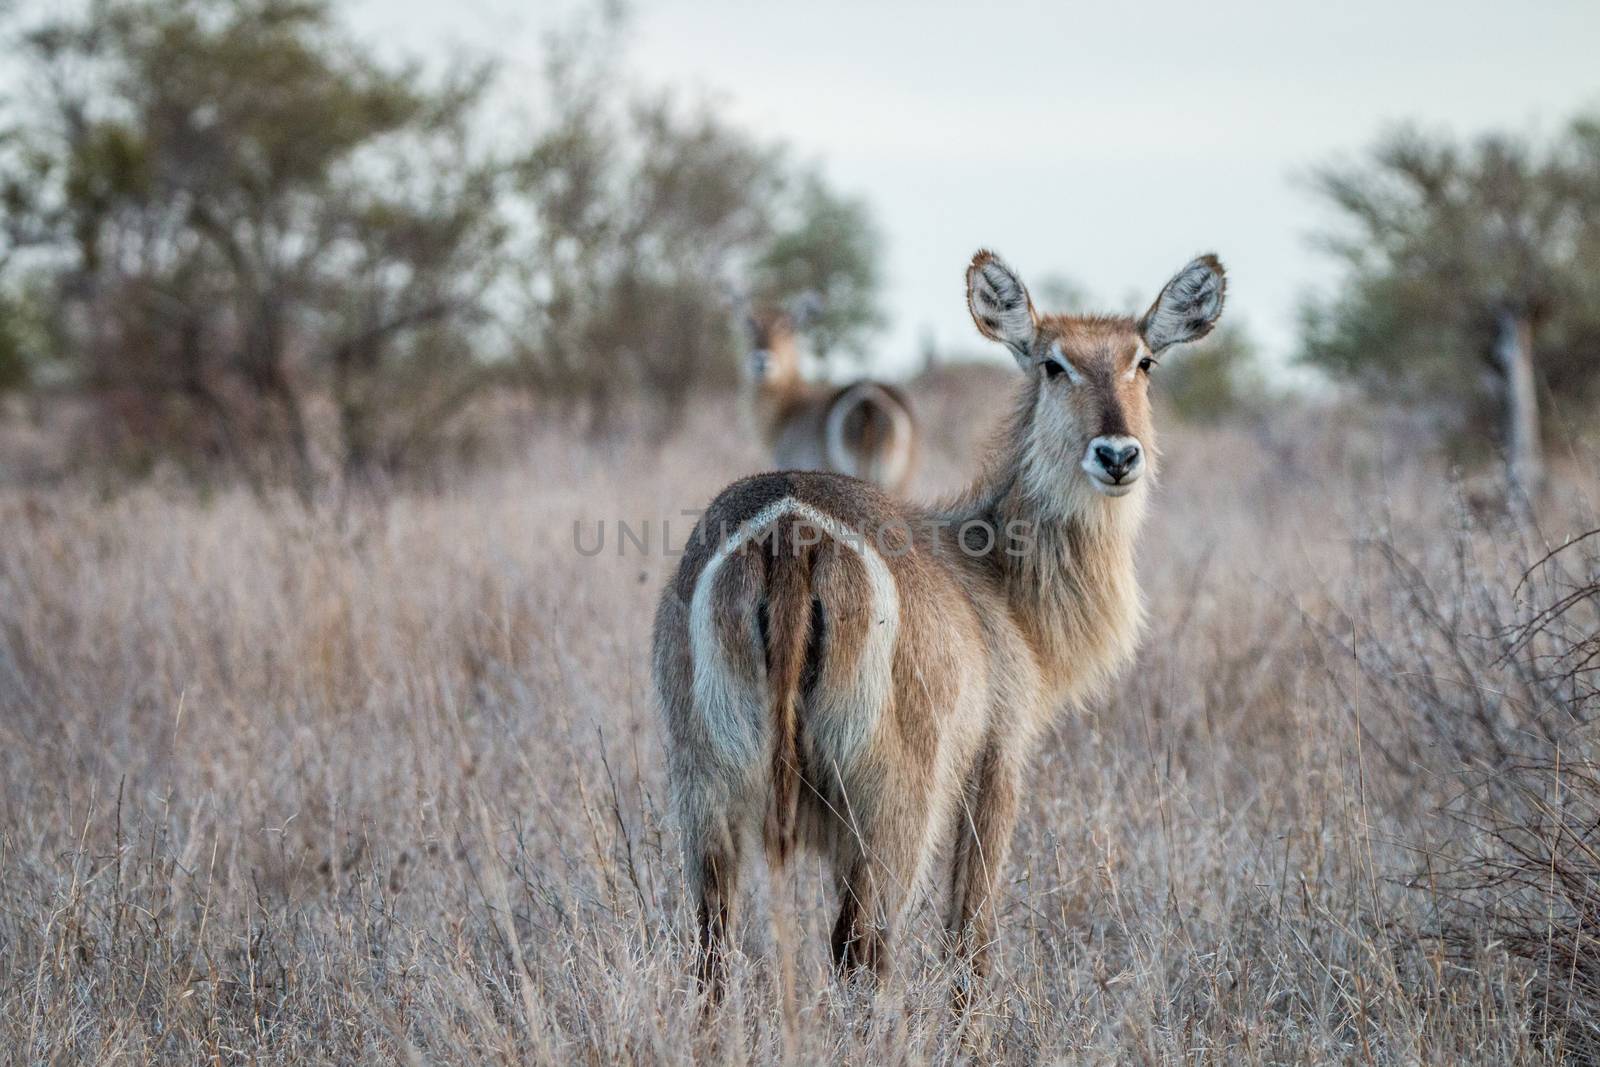 Starring Waterbucks in the Kruger National Park, South Africa.